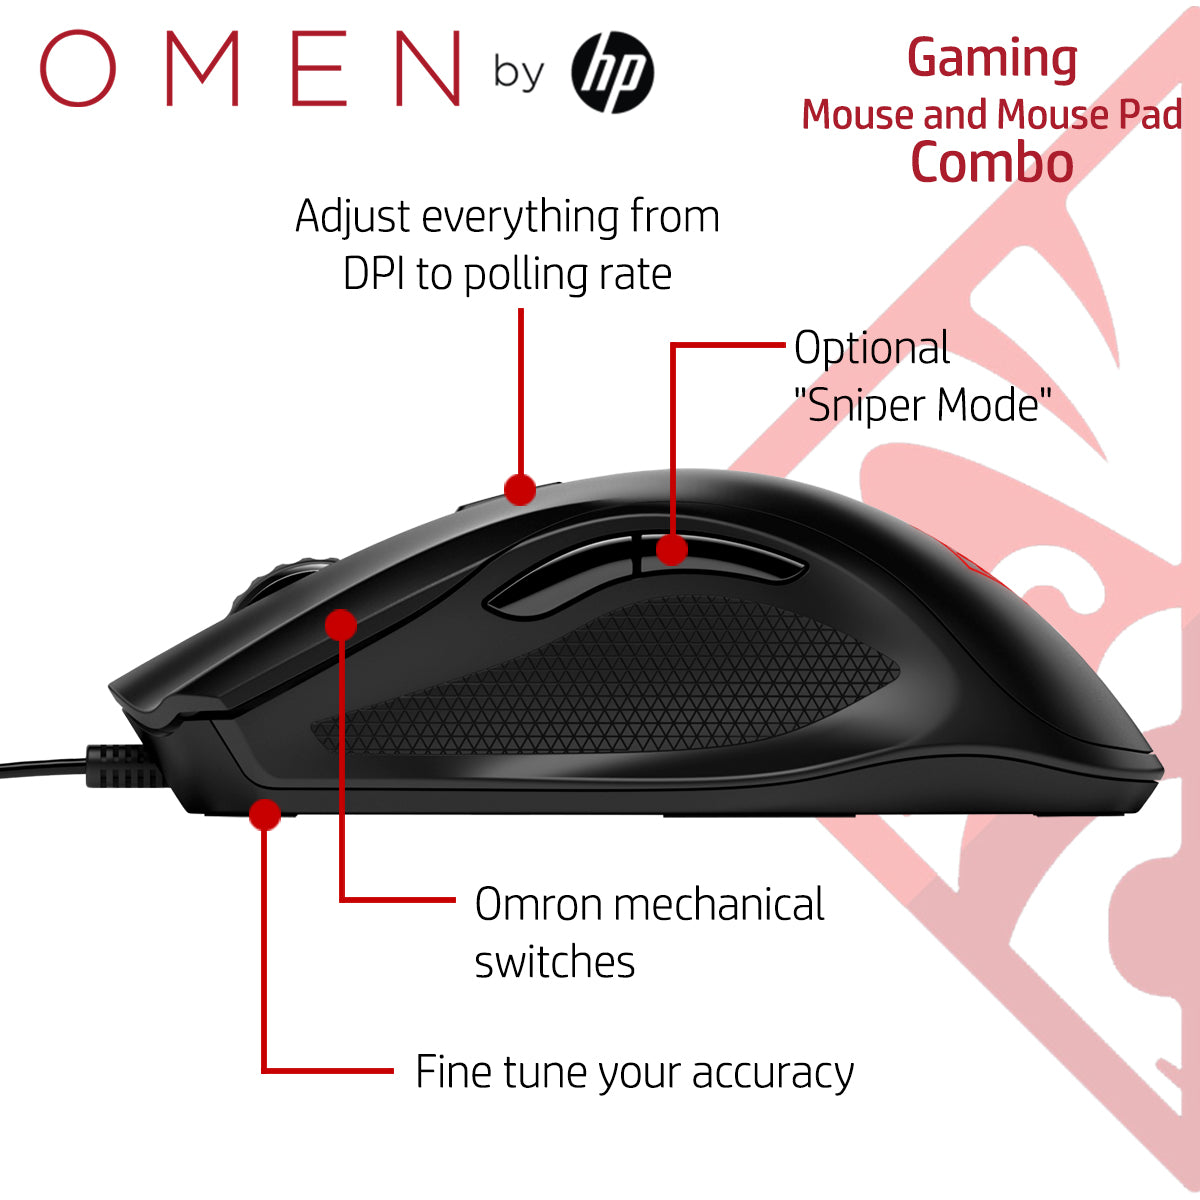 OMEN 400 Mouse and Mouse Pad Gaming Combo (3ML38AA, 2VP01AA)